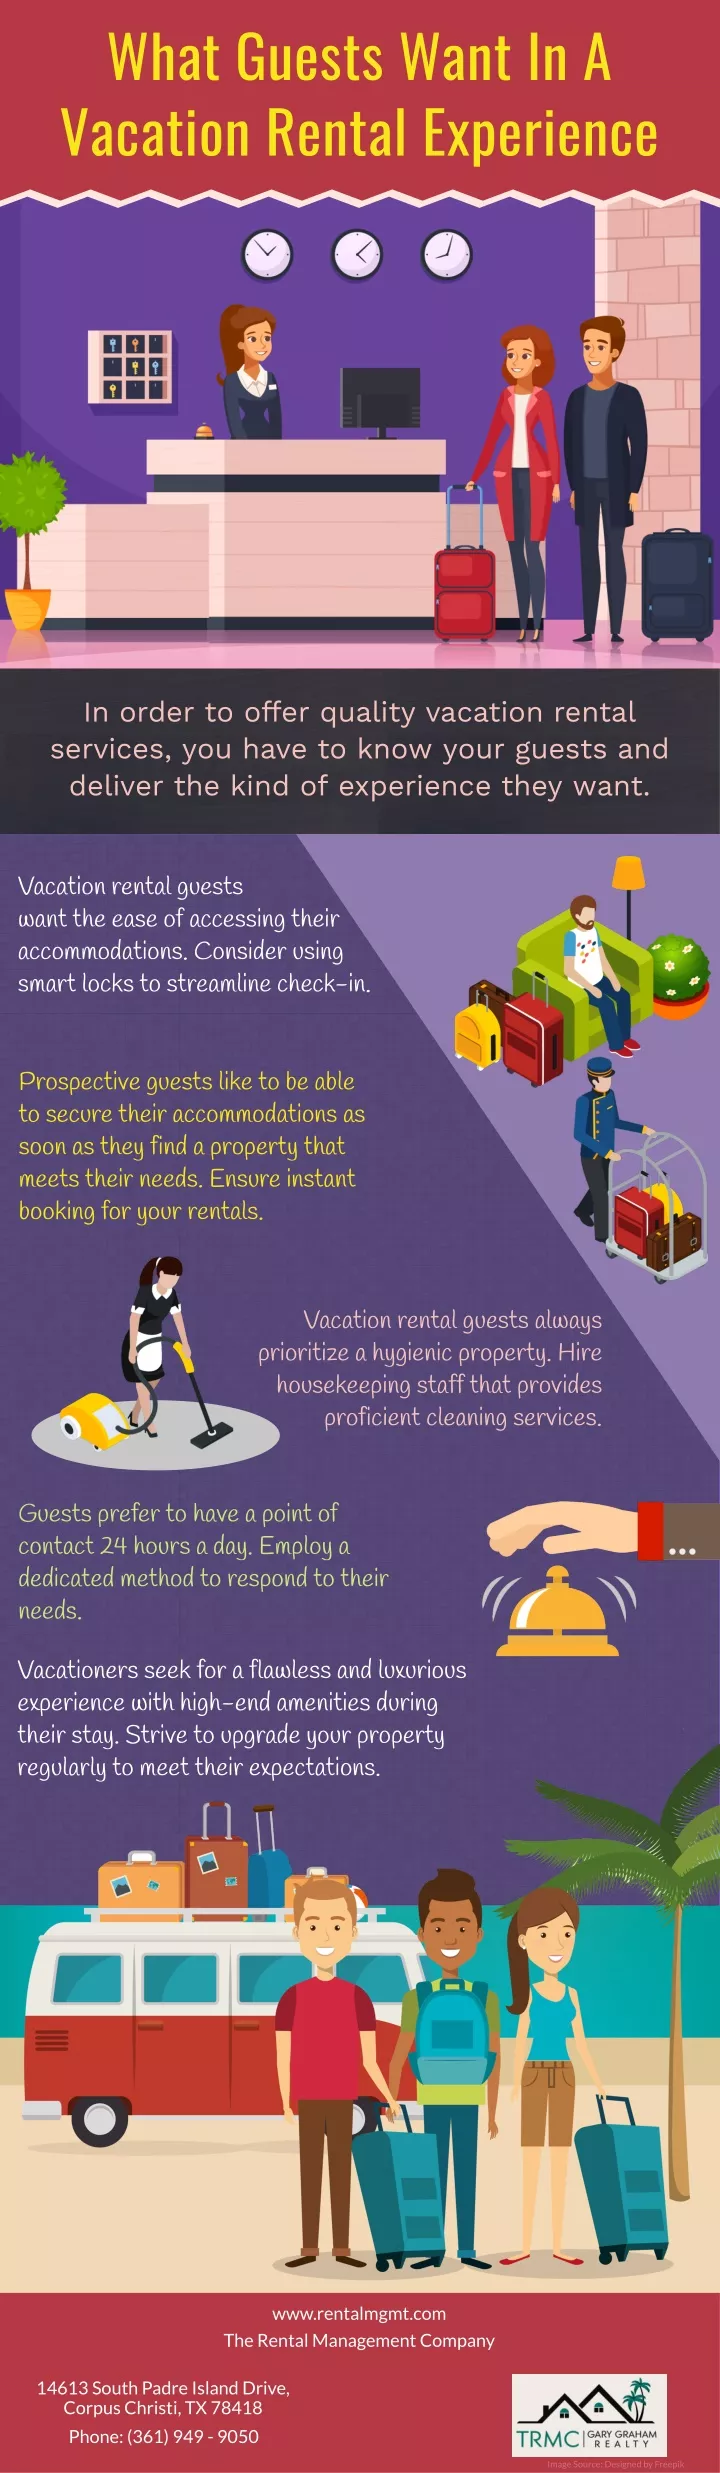 what guests want in a vacation rental experience